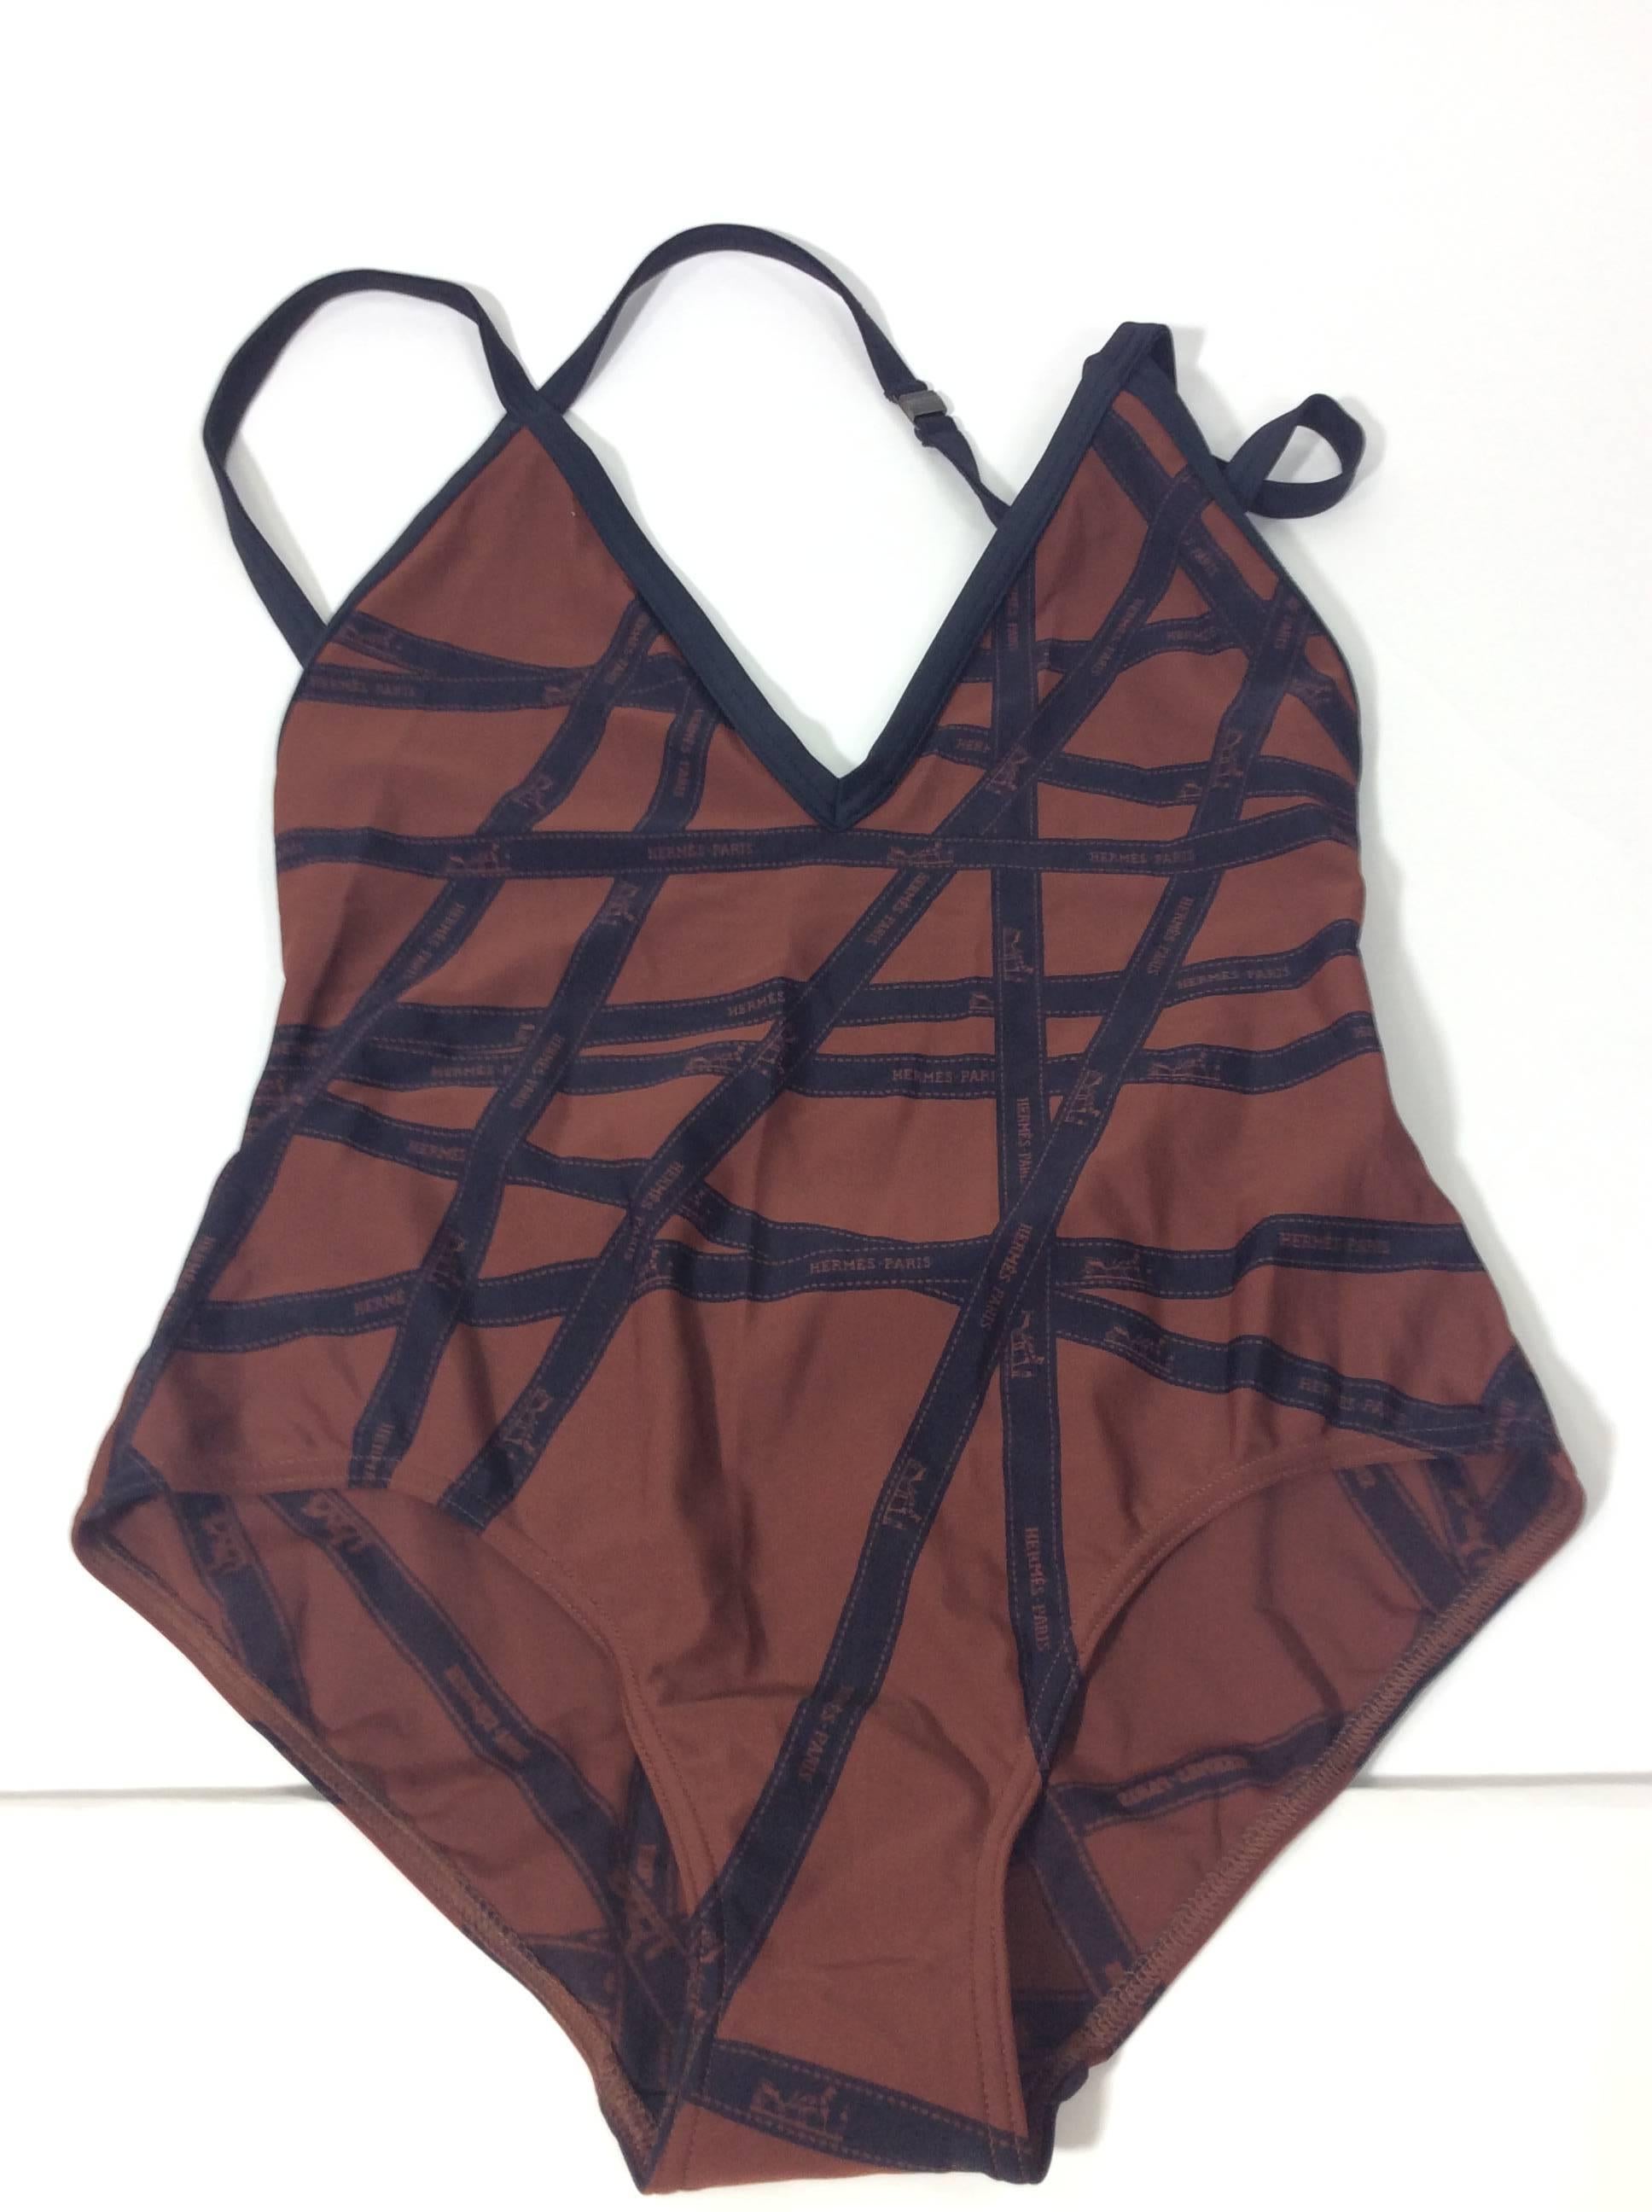 Ribbon Print Brown and Navy Swimsuit
Includes halter and shoulder straps
Open back and v-neck
Ribbon print with Hermes logo
Size 40
80% Polyamide, 20% Elastine